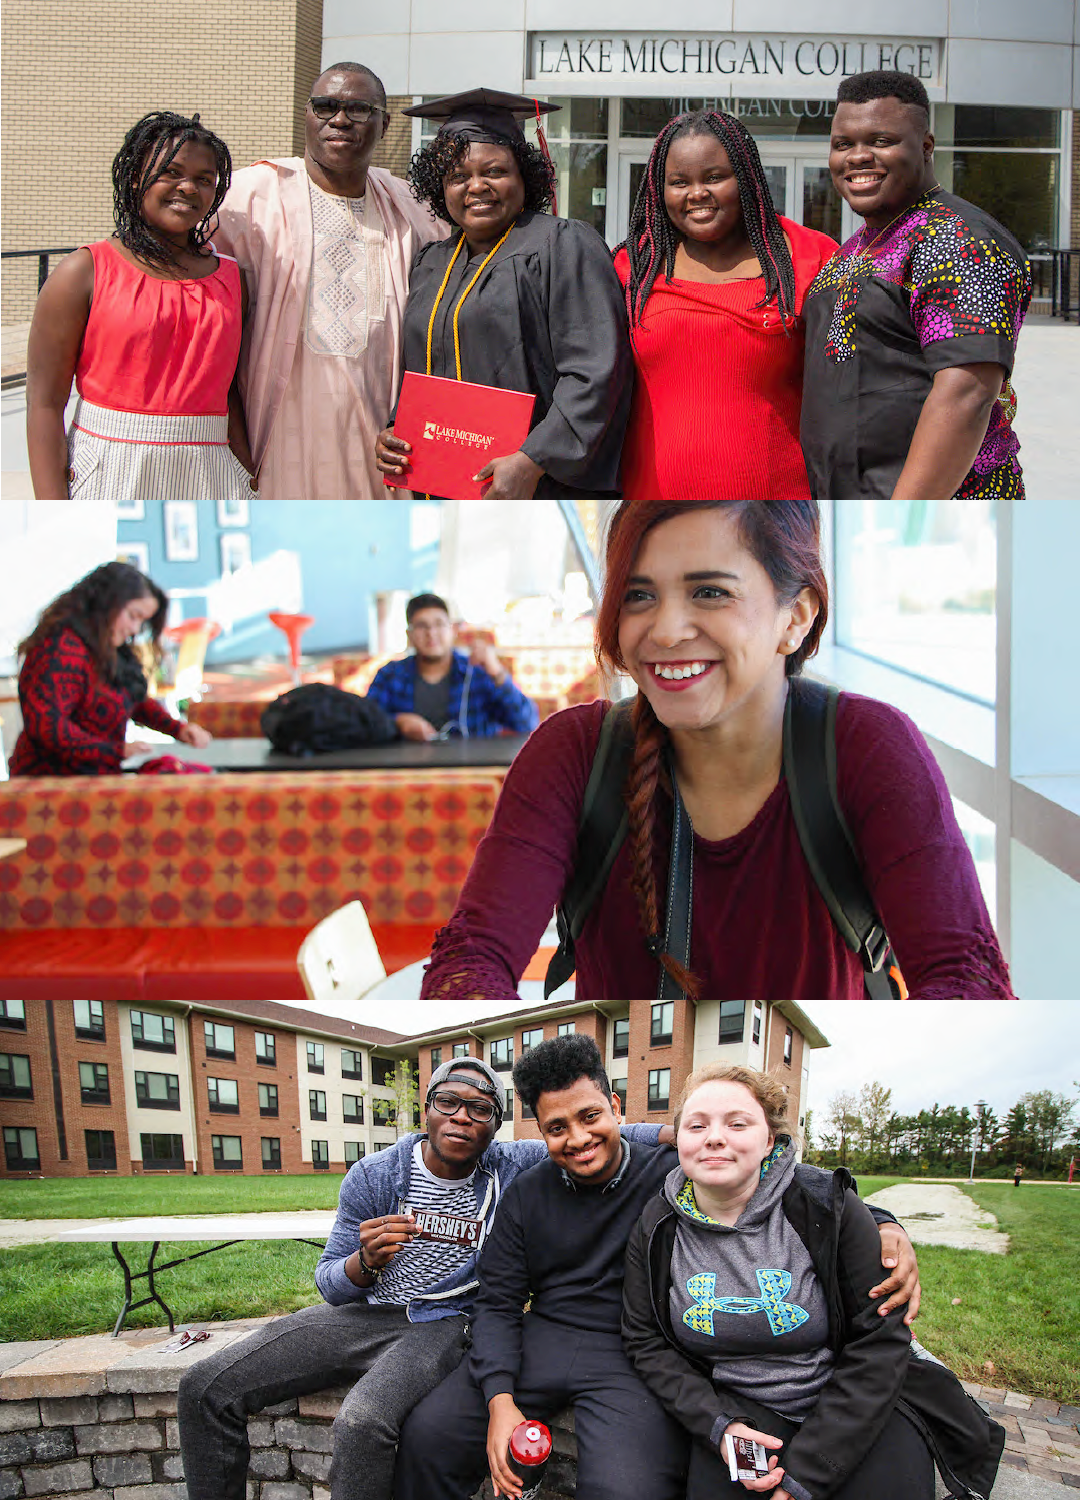 Collage of three images showing students of different ages, races and genders graduating, studying and having fun.